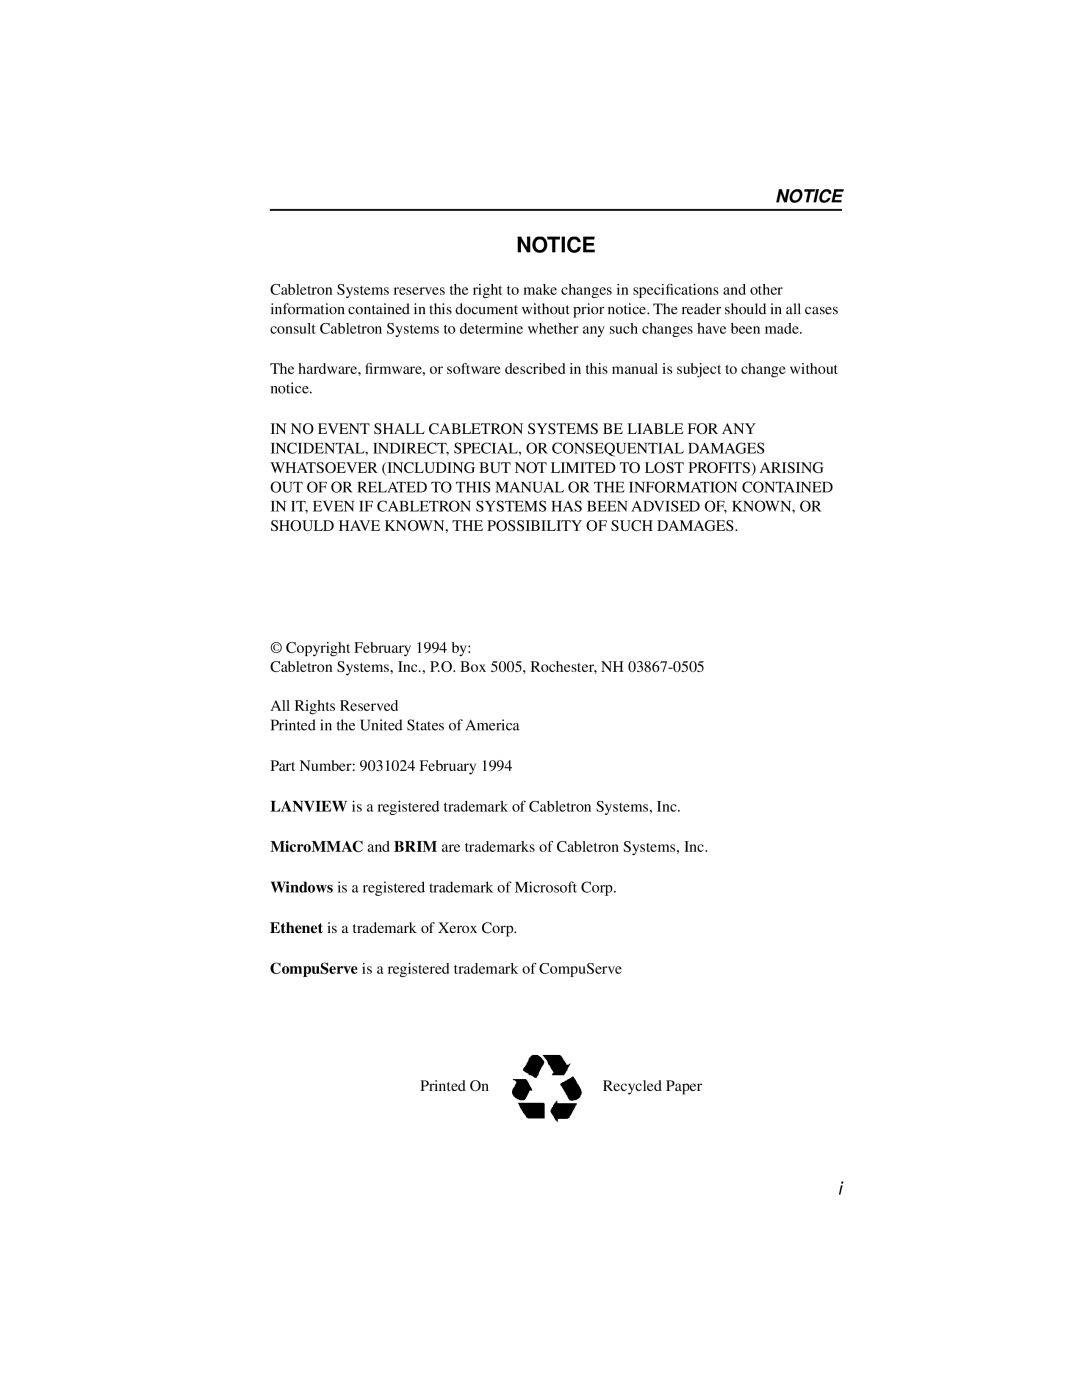 Cabletron Systems BRIM-WT1 manual Copyright February 1994 by 